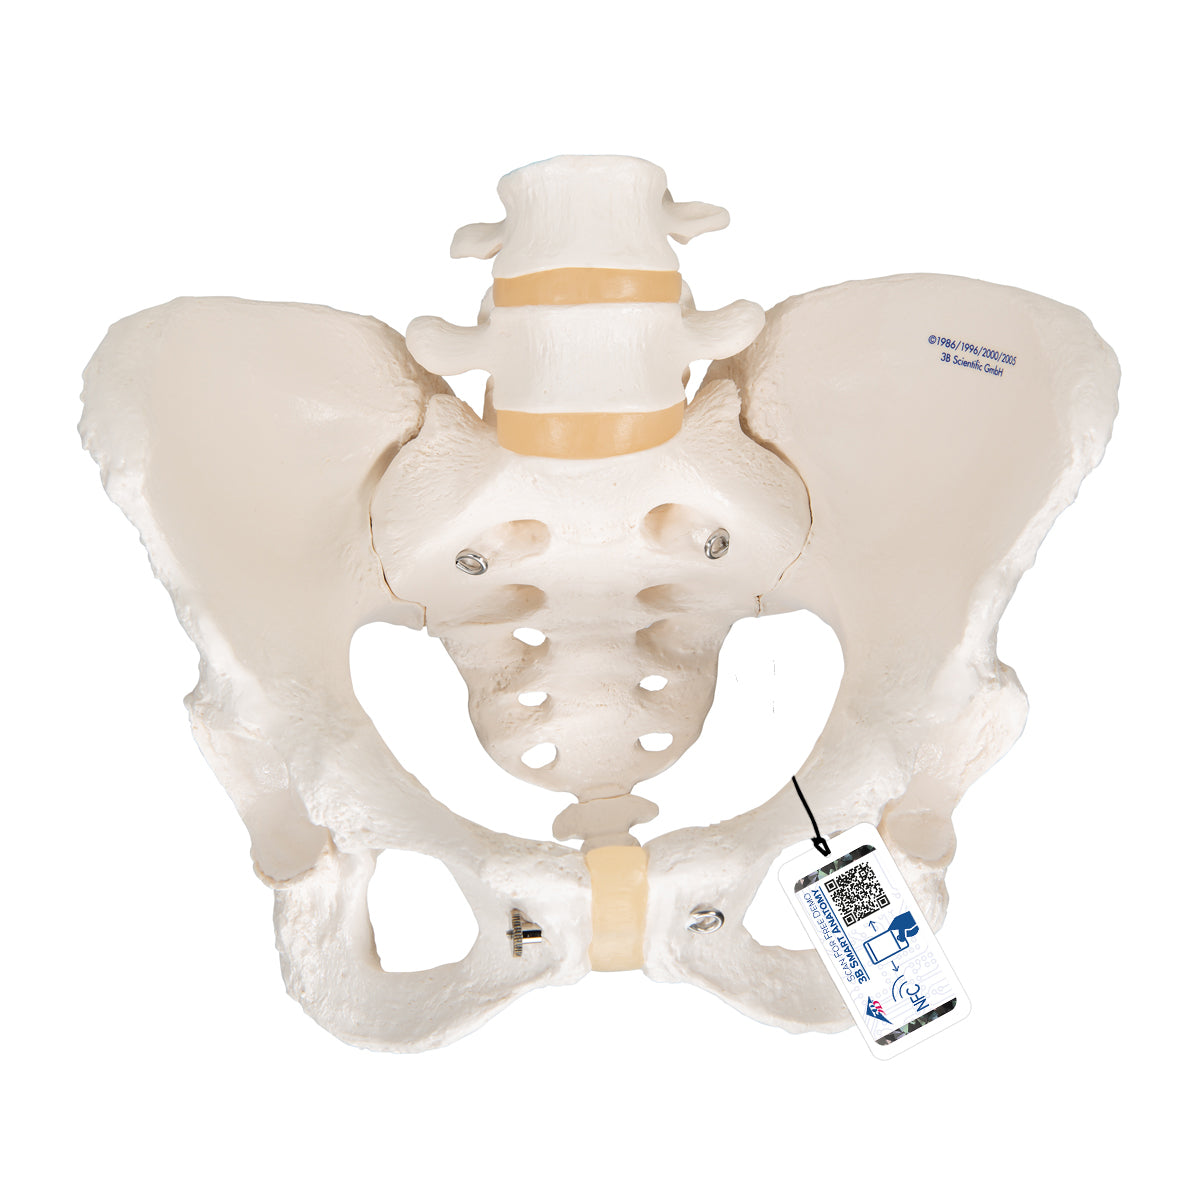 Set of 2 models showing the male and female joints and bones in the pelvis